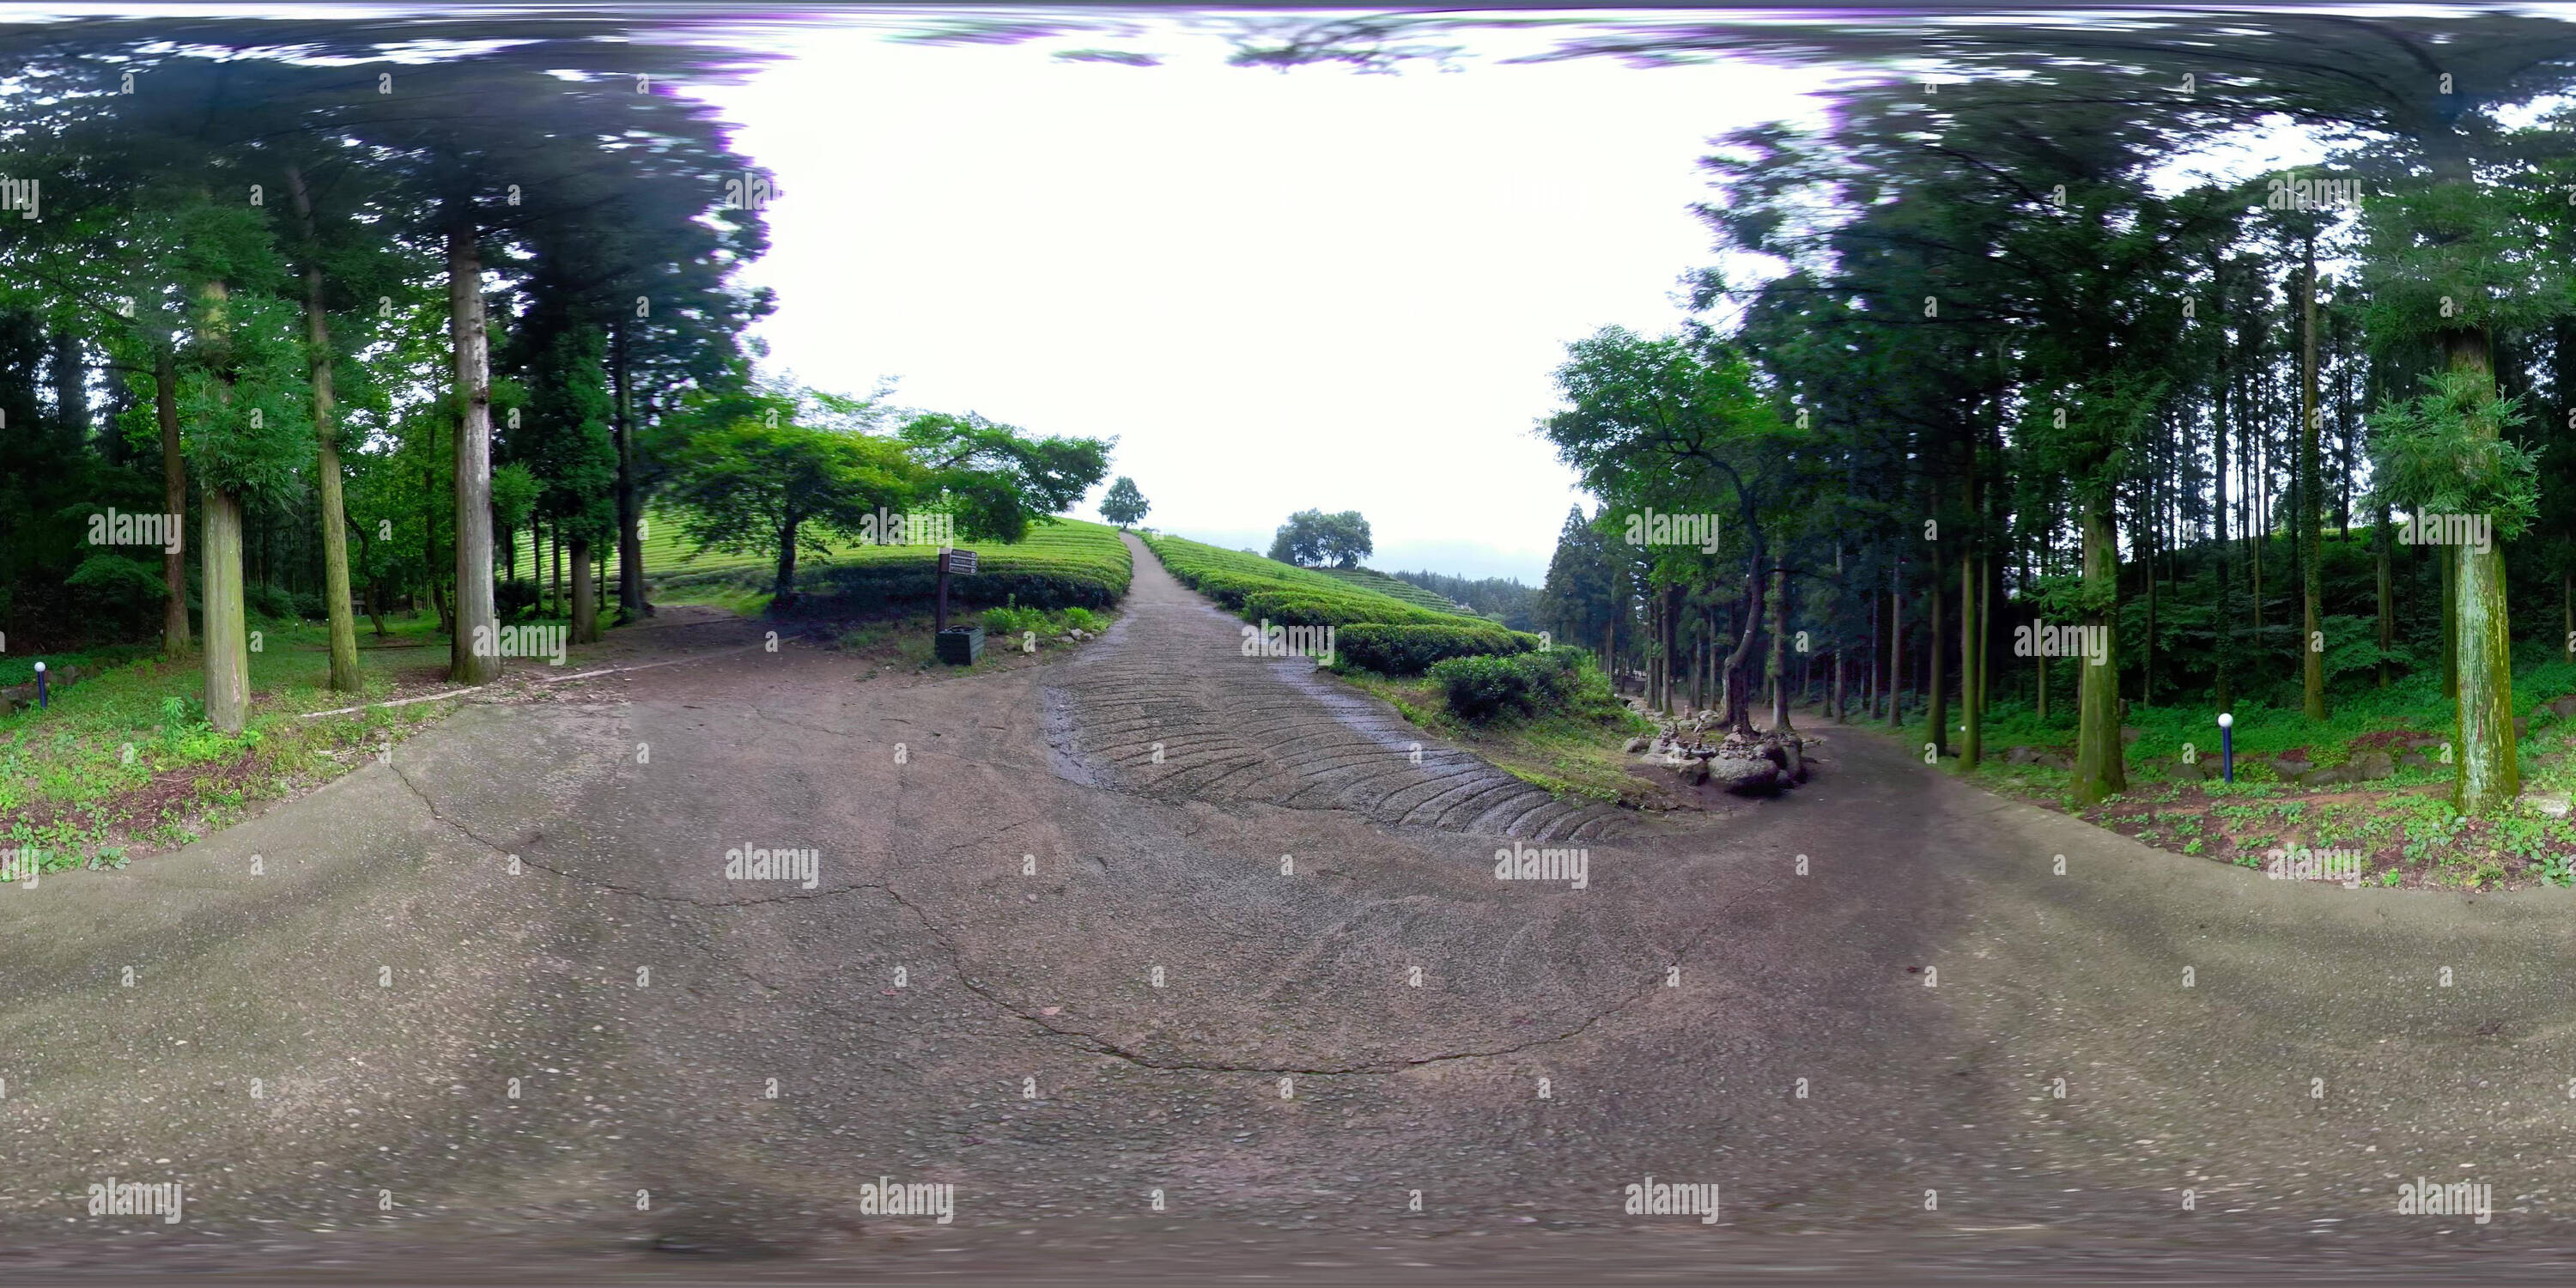 360 degree panoramic view of Boseong, South Korea 18 July 2019 Daehandawon. After heavy rain 360 degrees spherical panorama of Daehandawon where is famous green tea farm and bambo